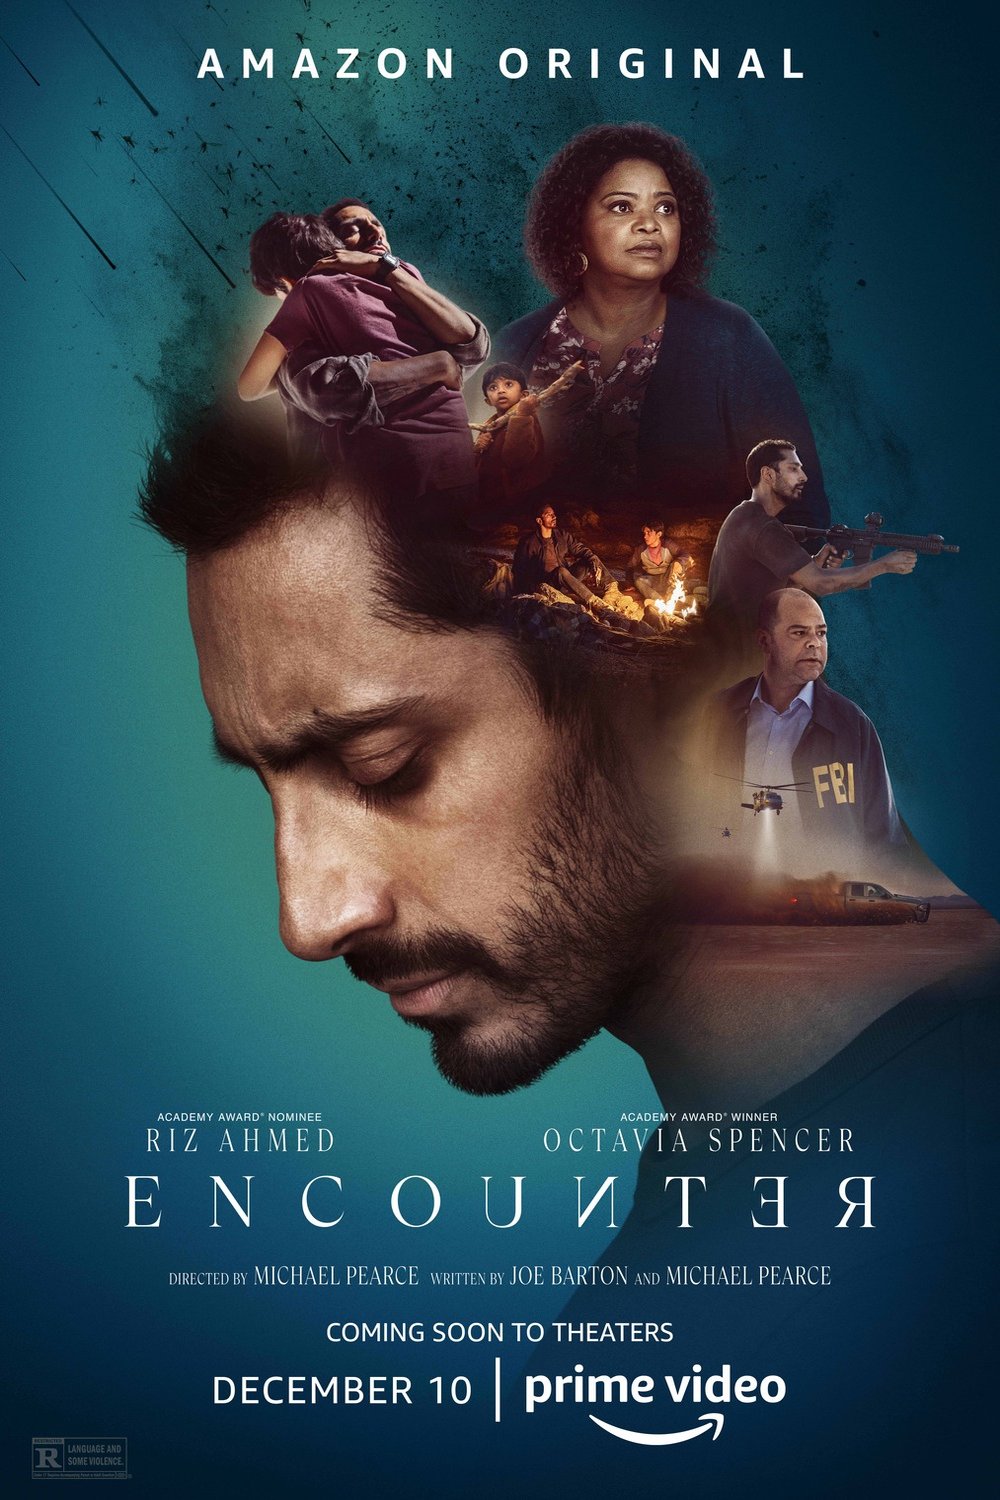 Poster of the movie Encounter